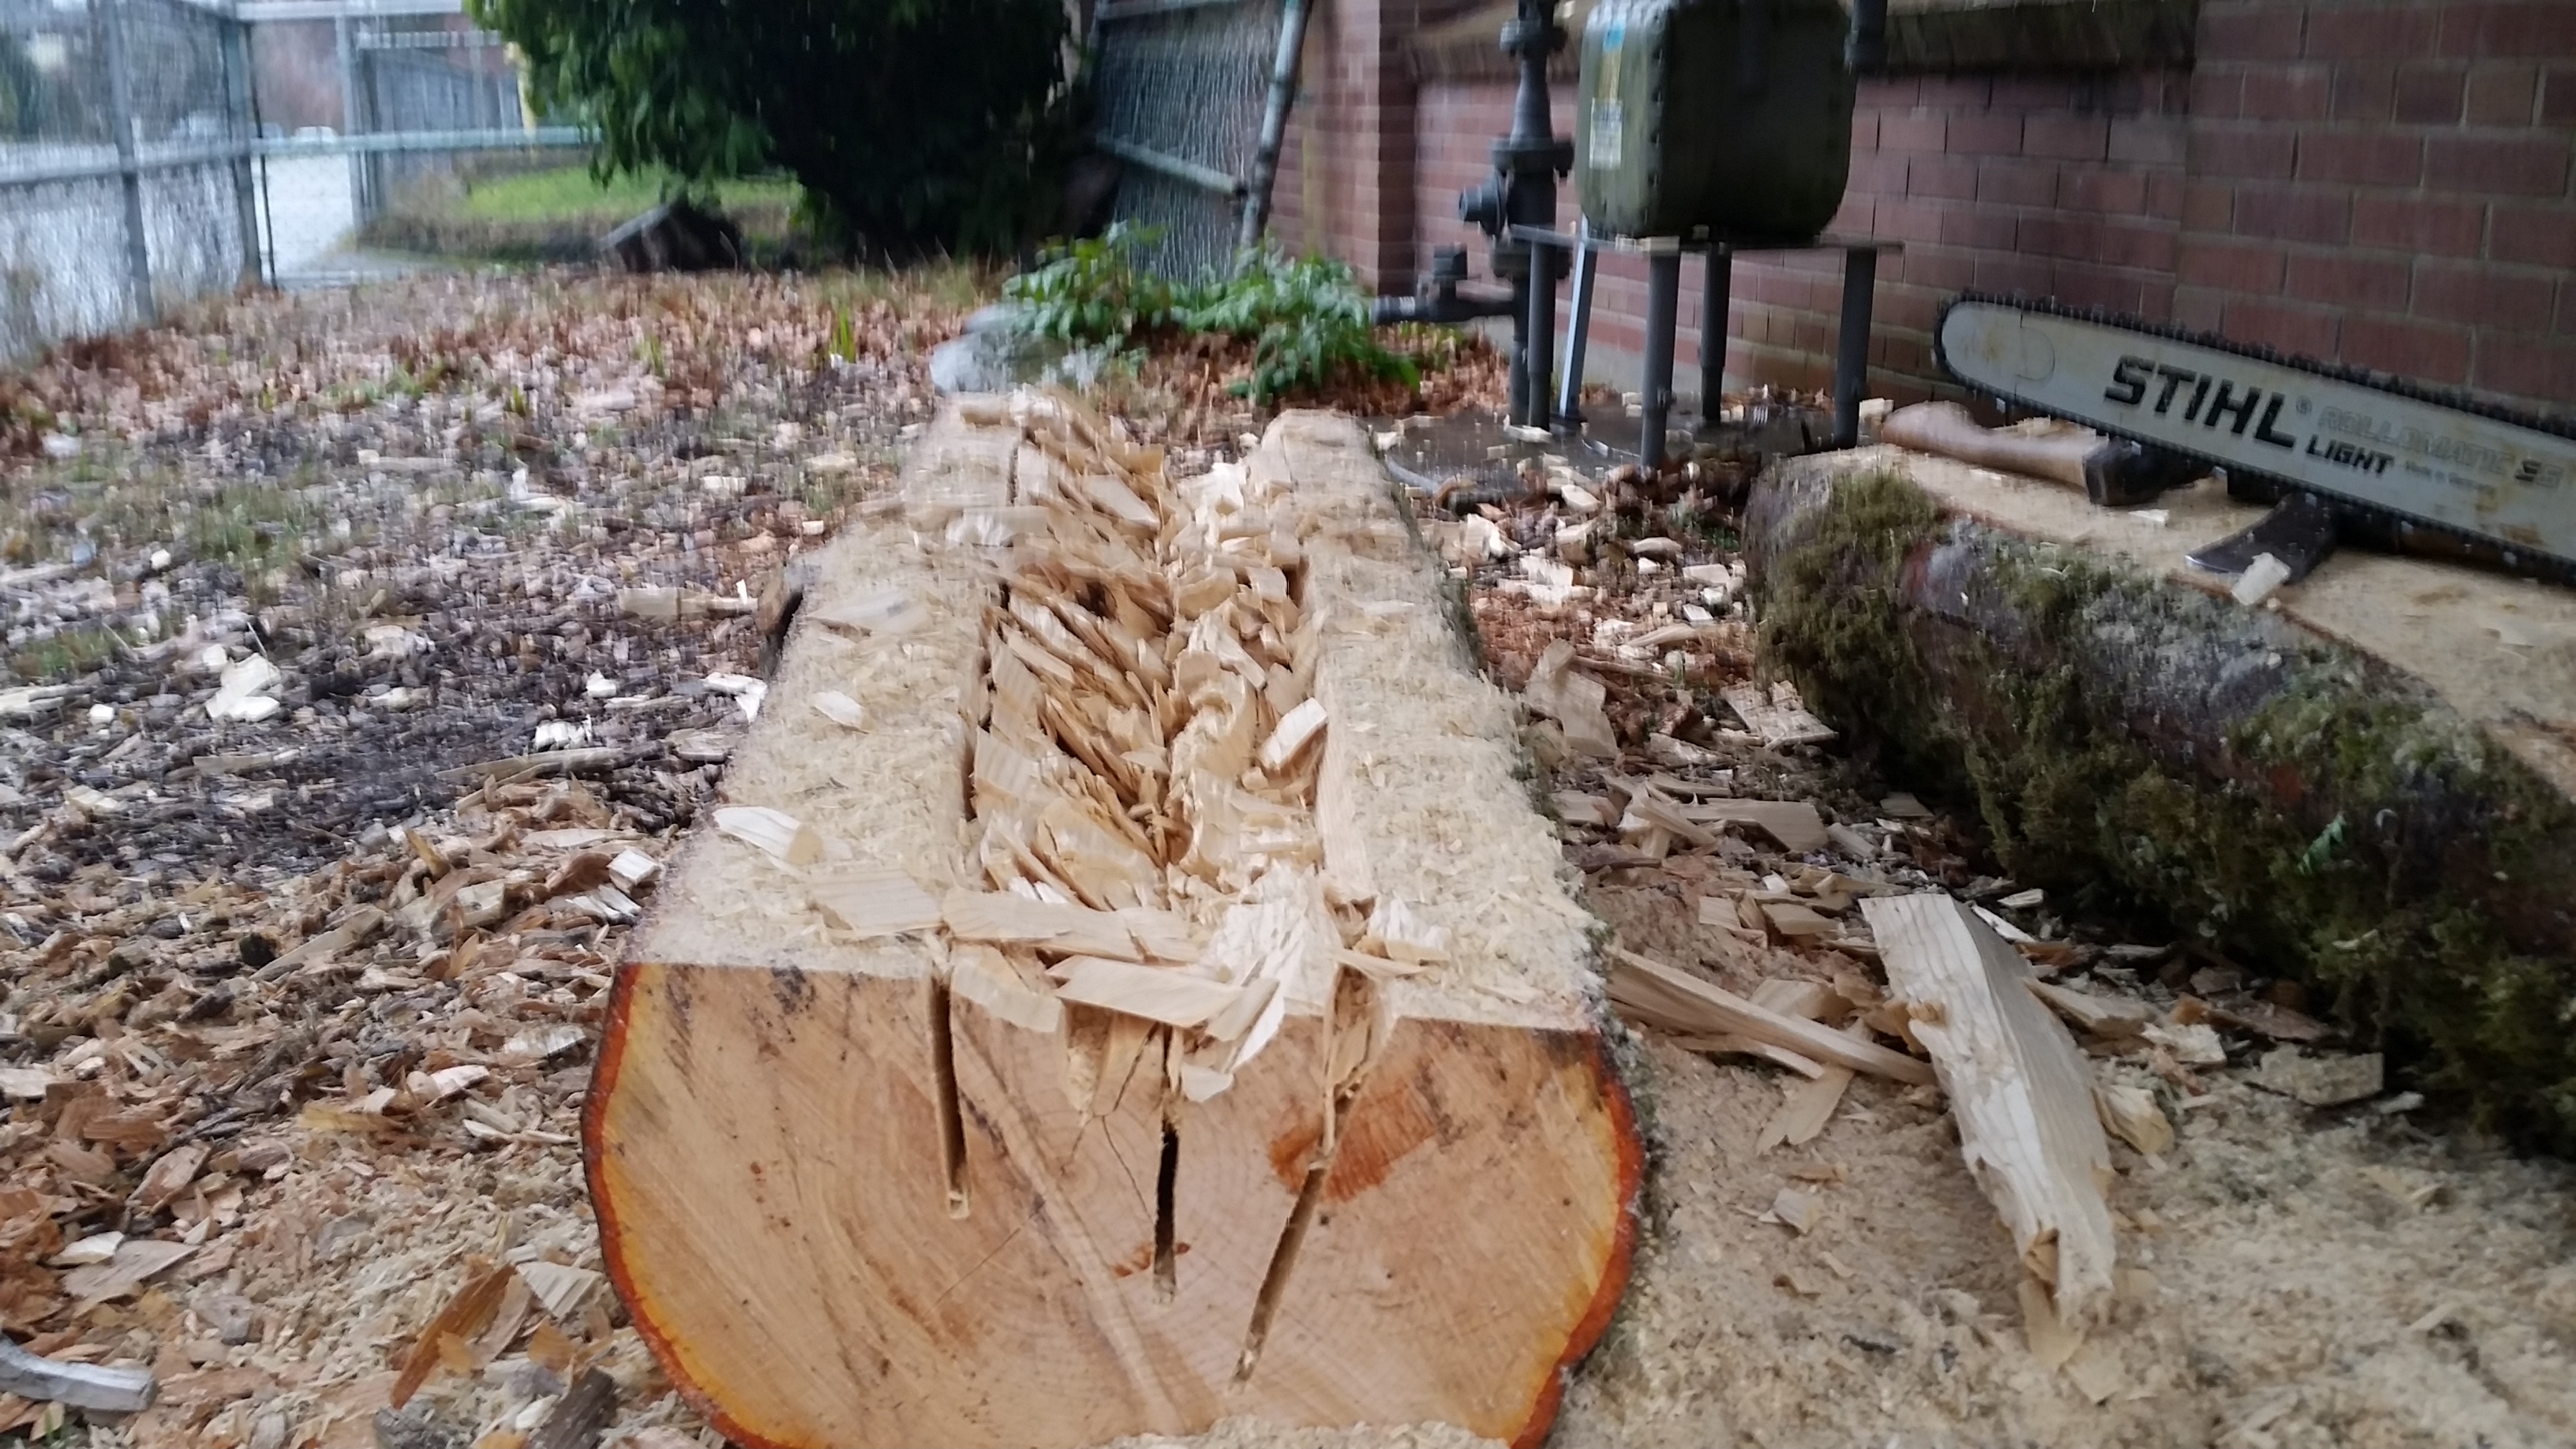 Chainsaw slits to hack out the wood easier